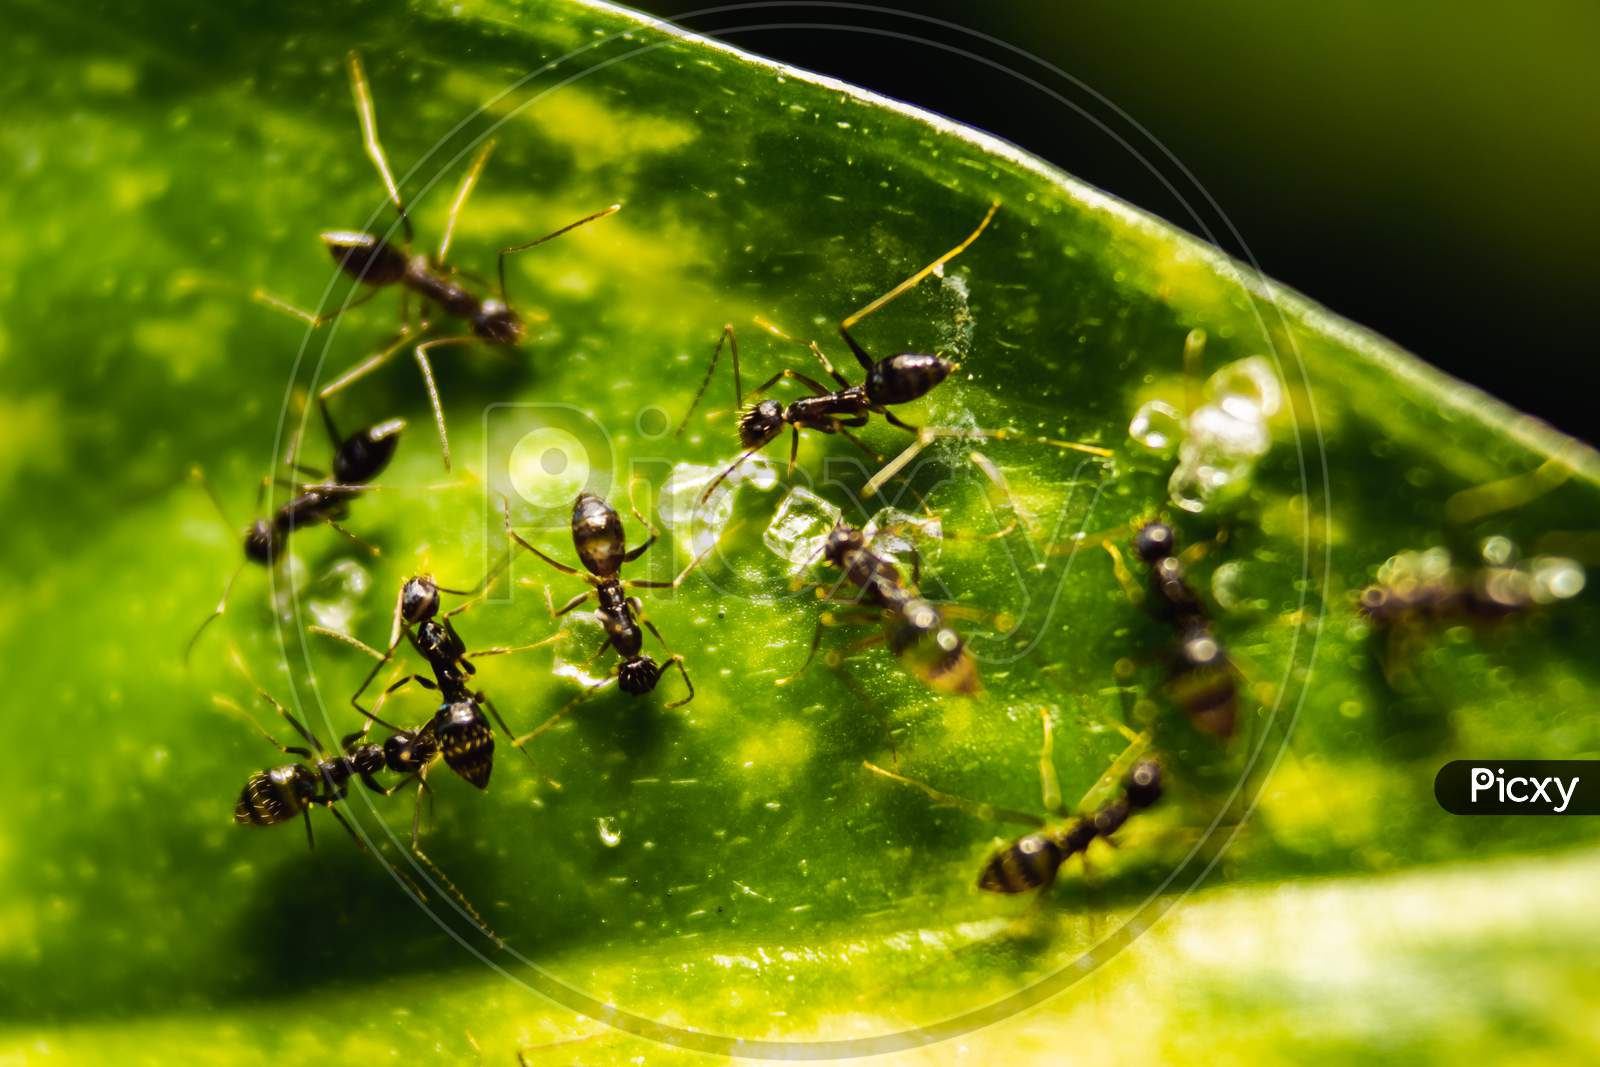 Group Of Small Black Ants Eating On The Leafs With Selective Focus. Macro Close Up A Lot Of Black Ants On Leaves With Lighting.